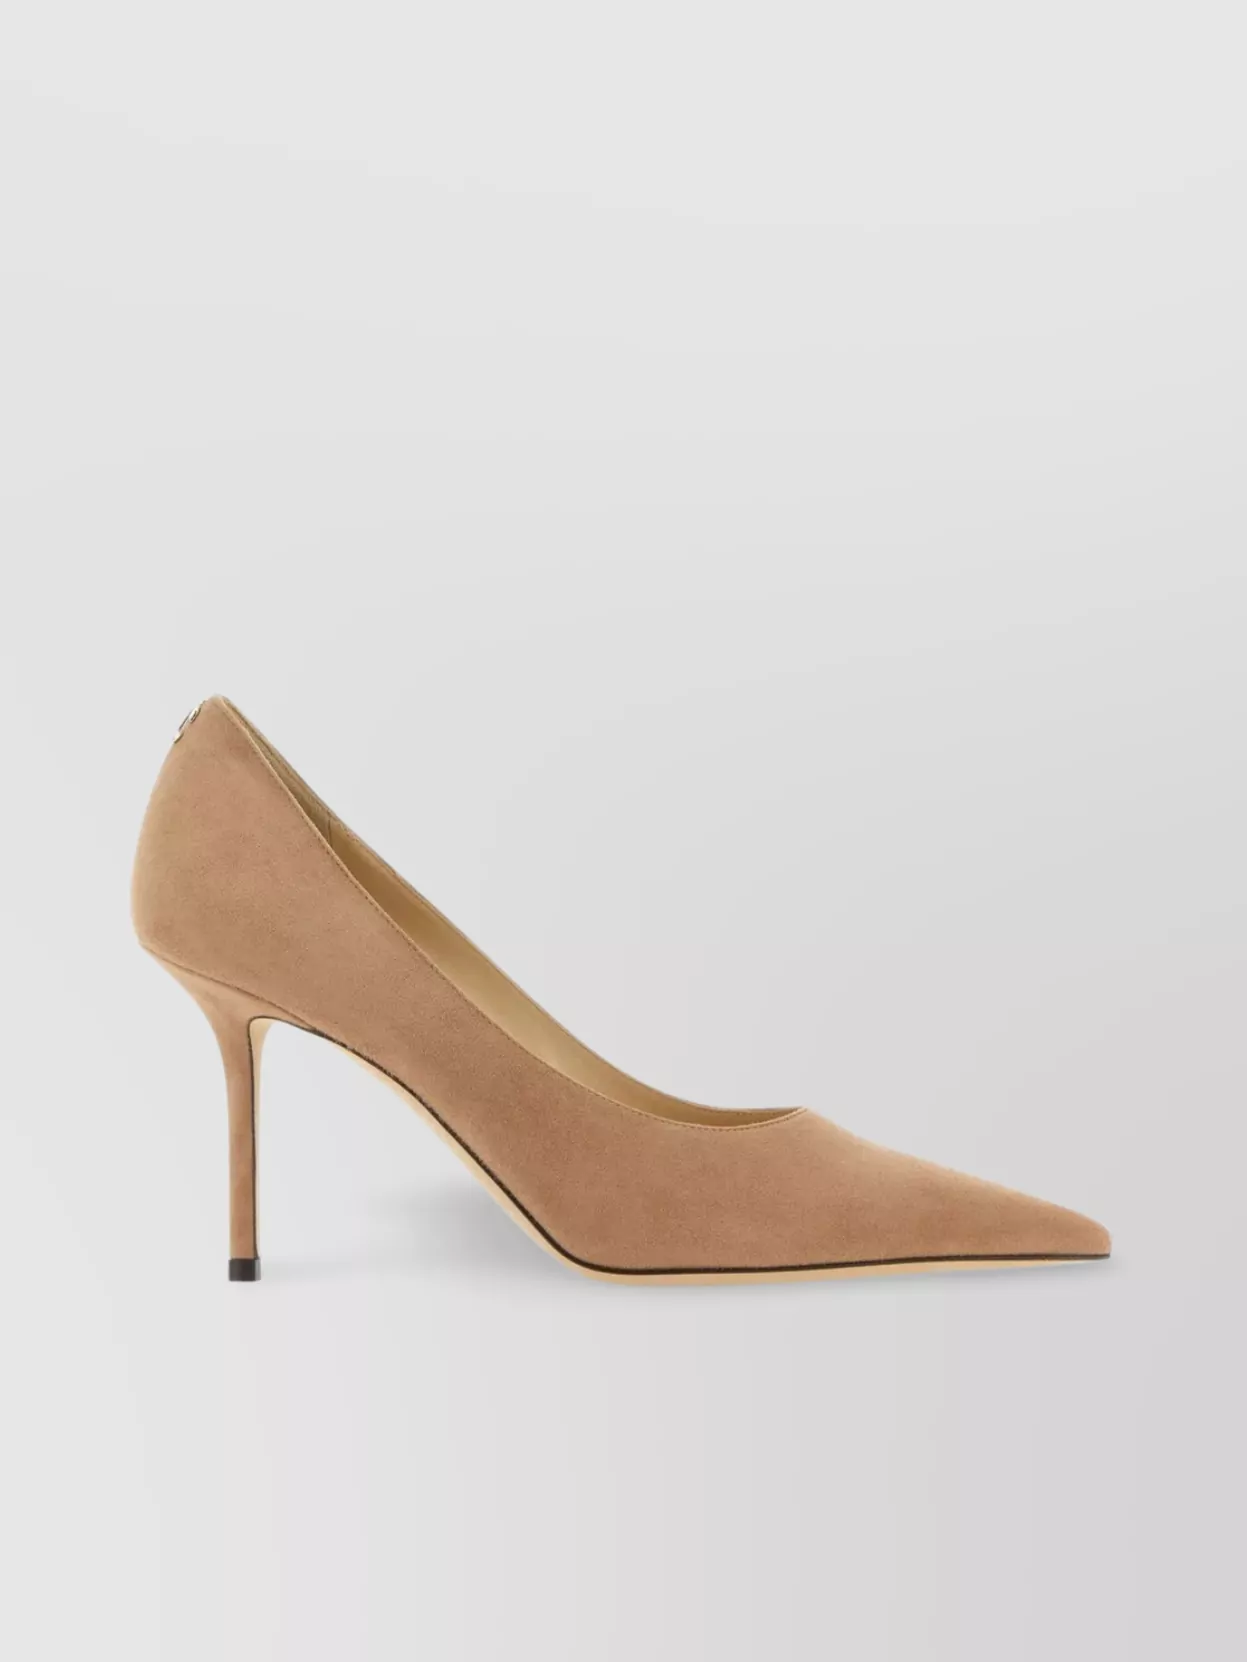 Shop Jimmy Choo 85 Love Suede Pumps With Pointed Toe And Stiletto Heel